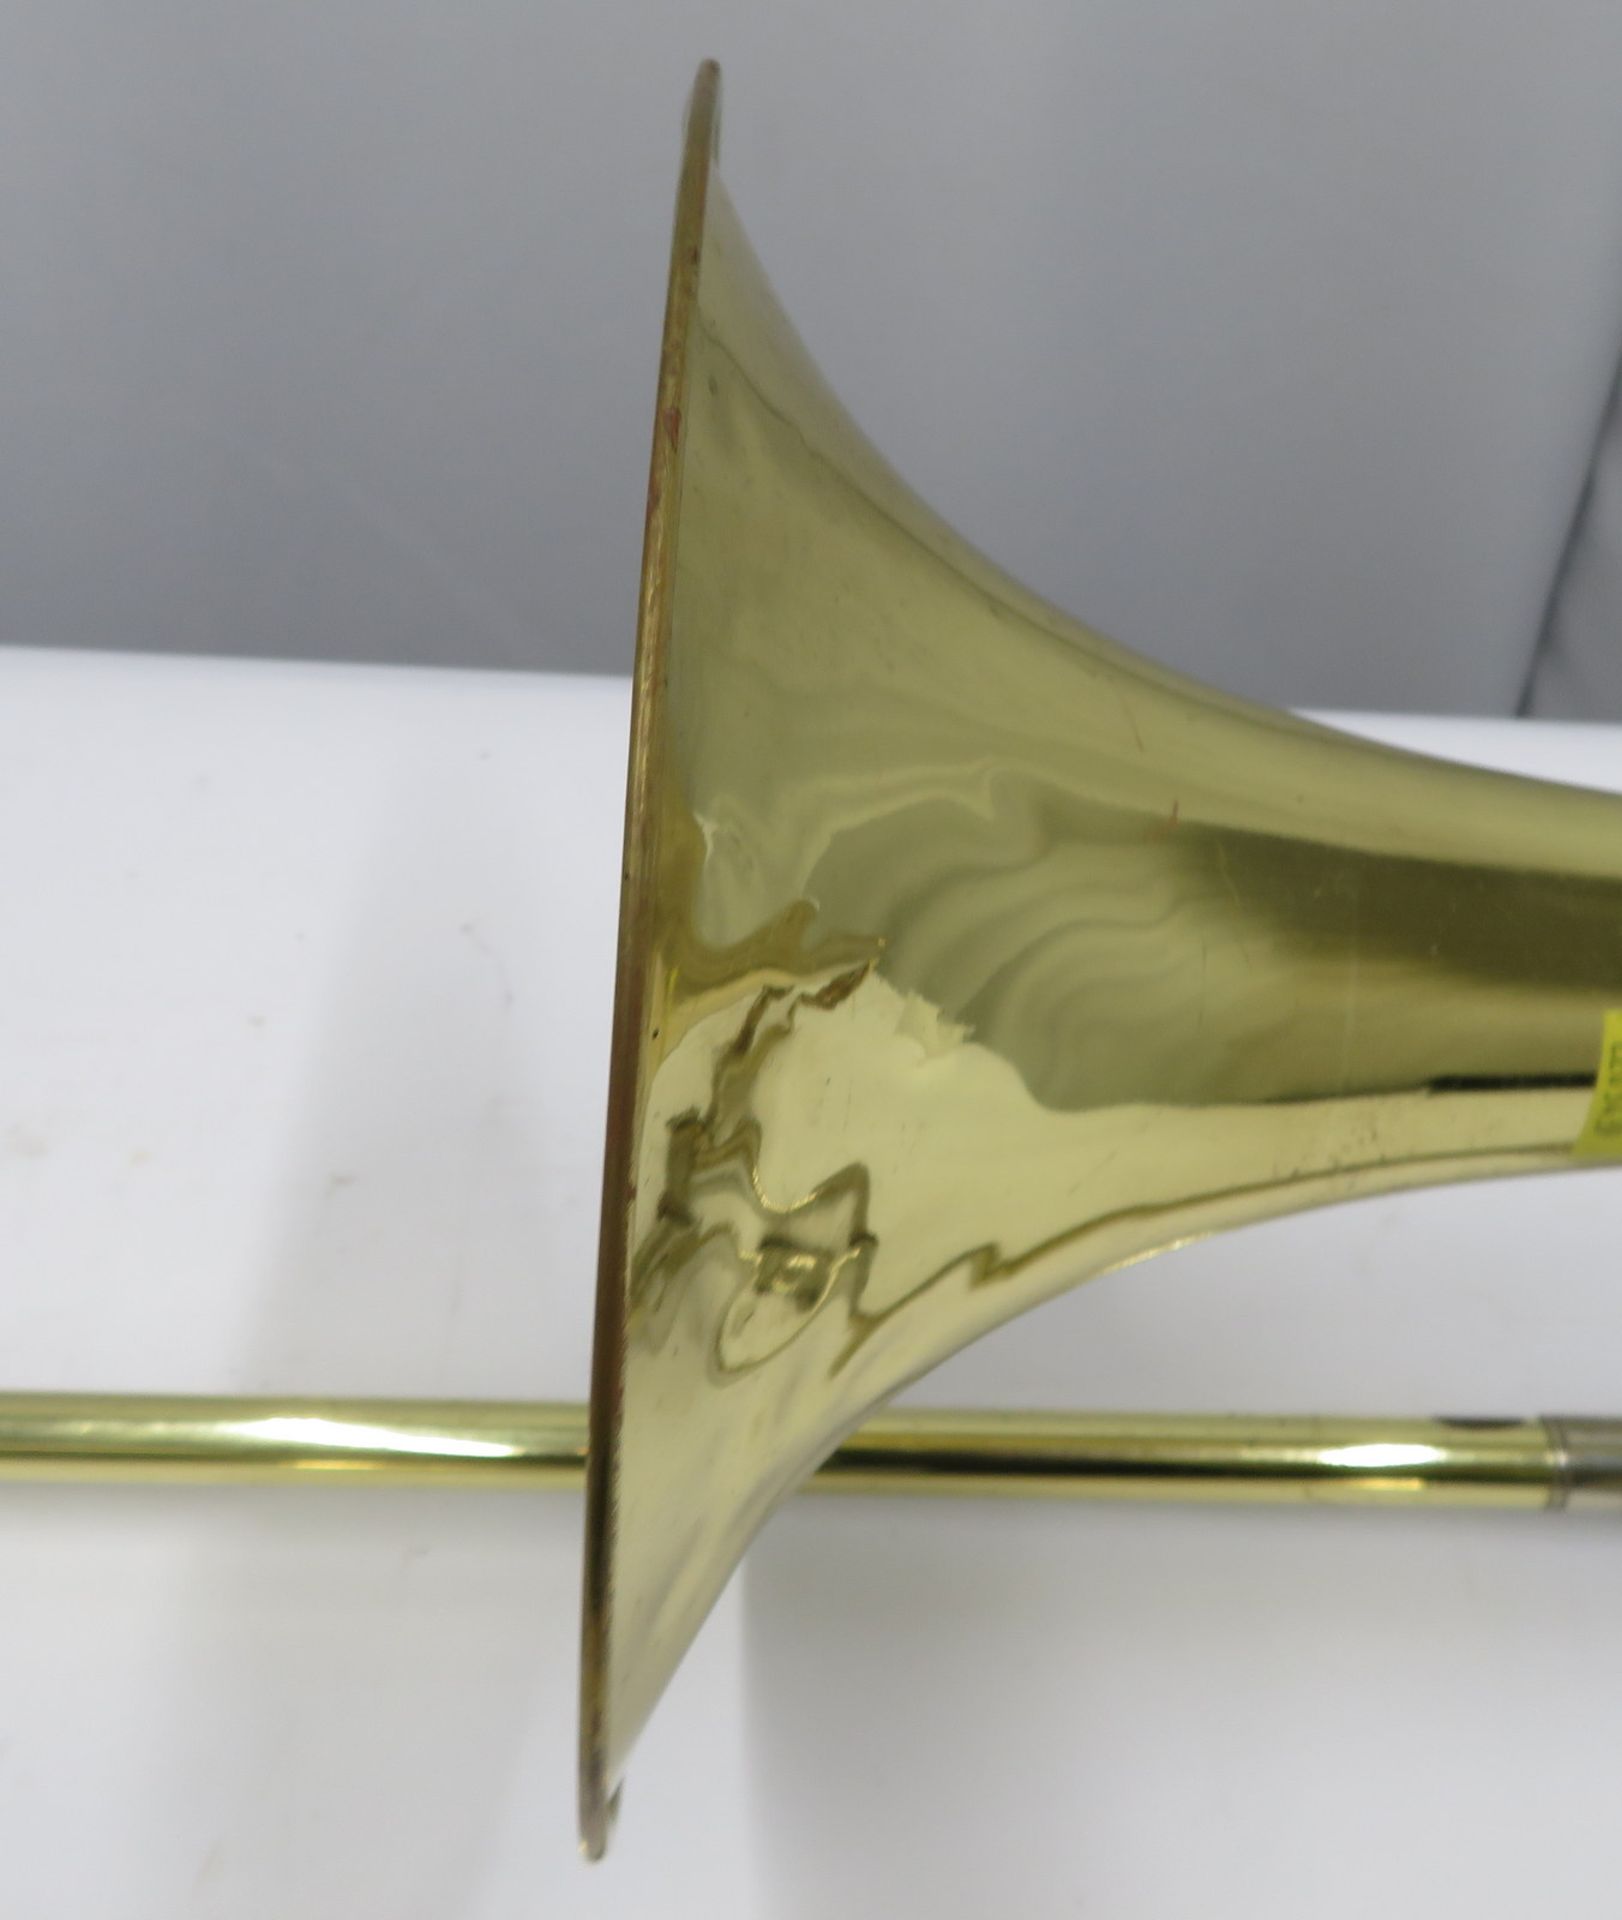 Rath R4 trombone with case. Serial number: R4140. - Image 8 of 19